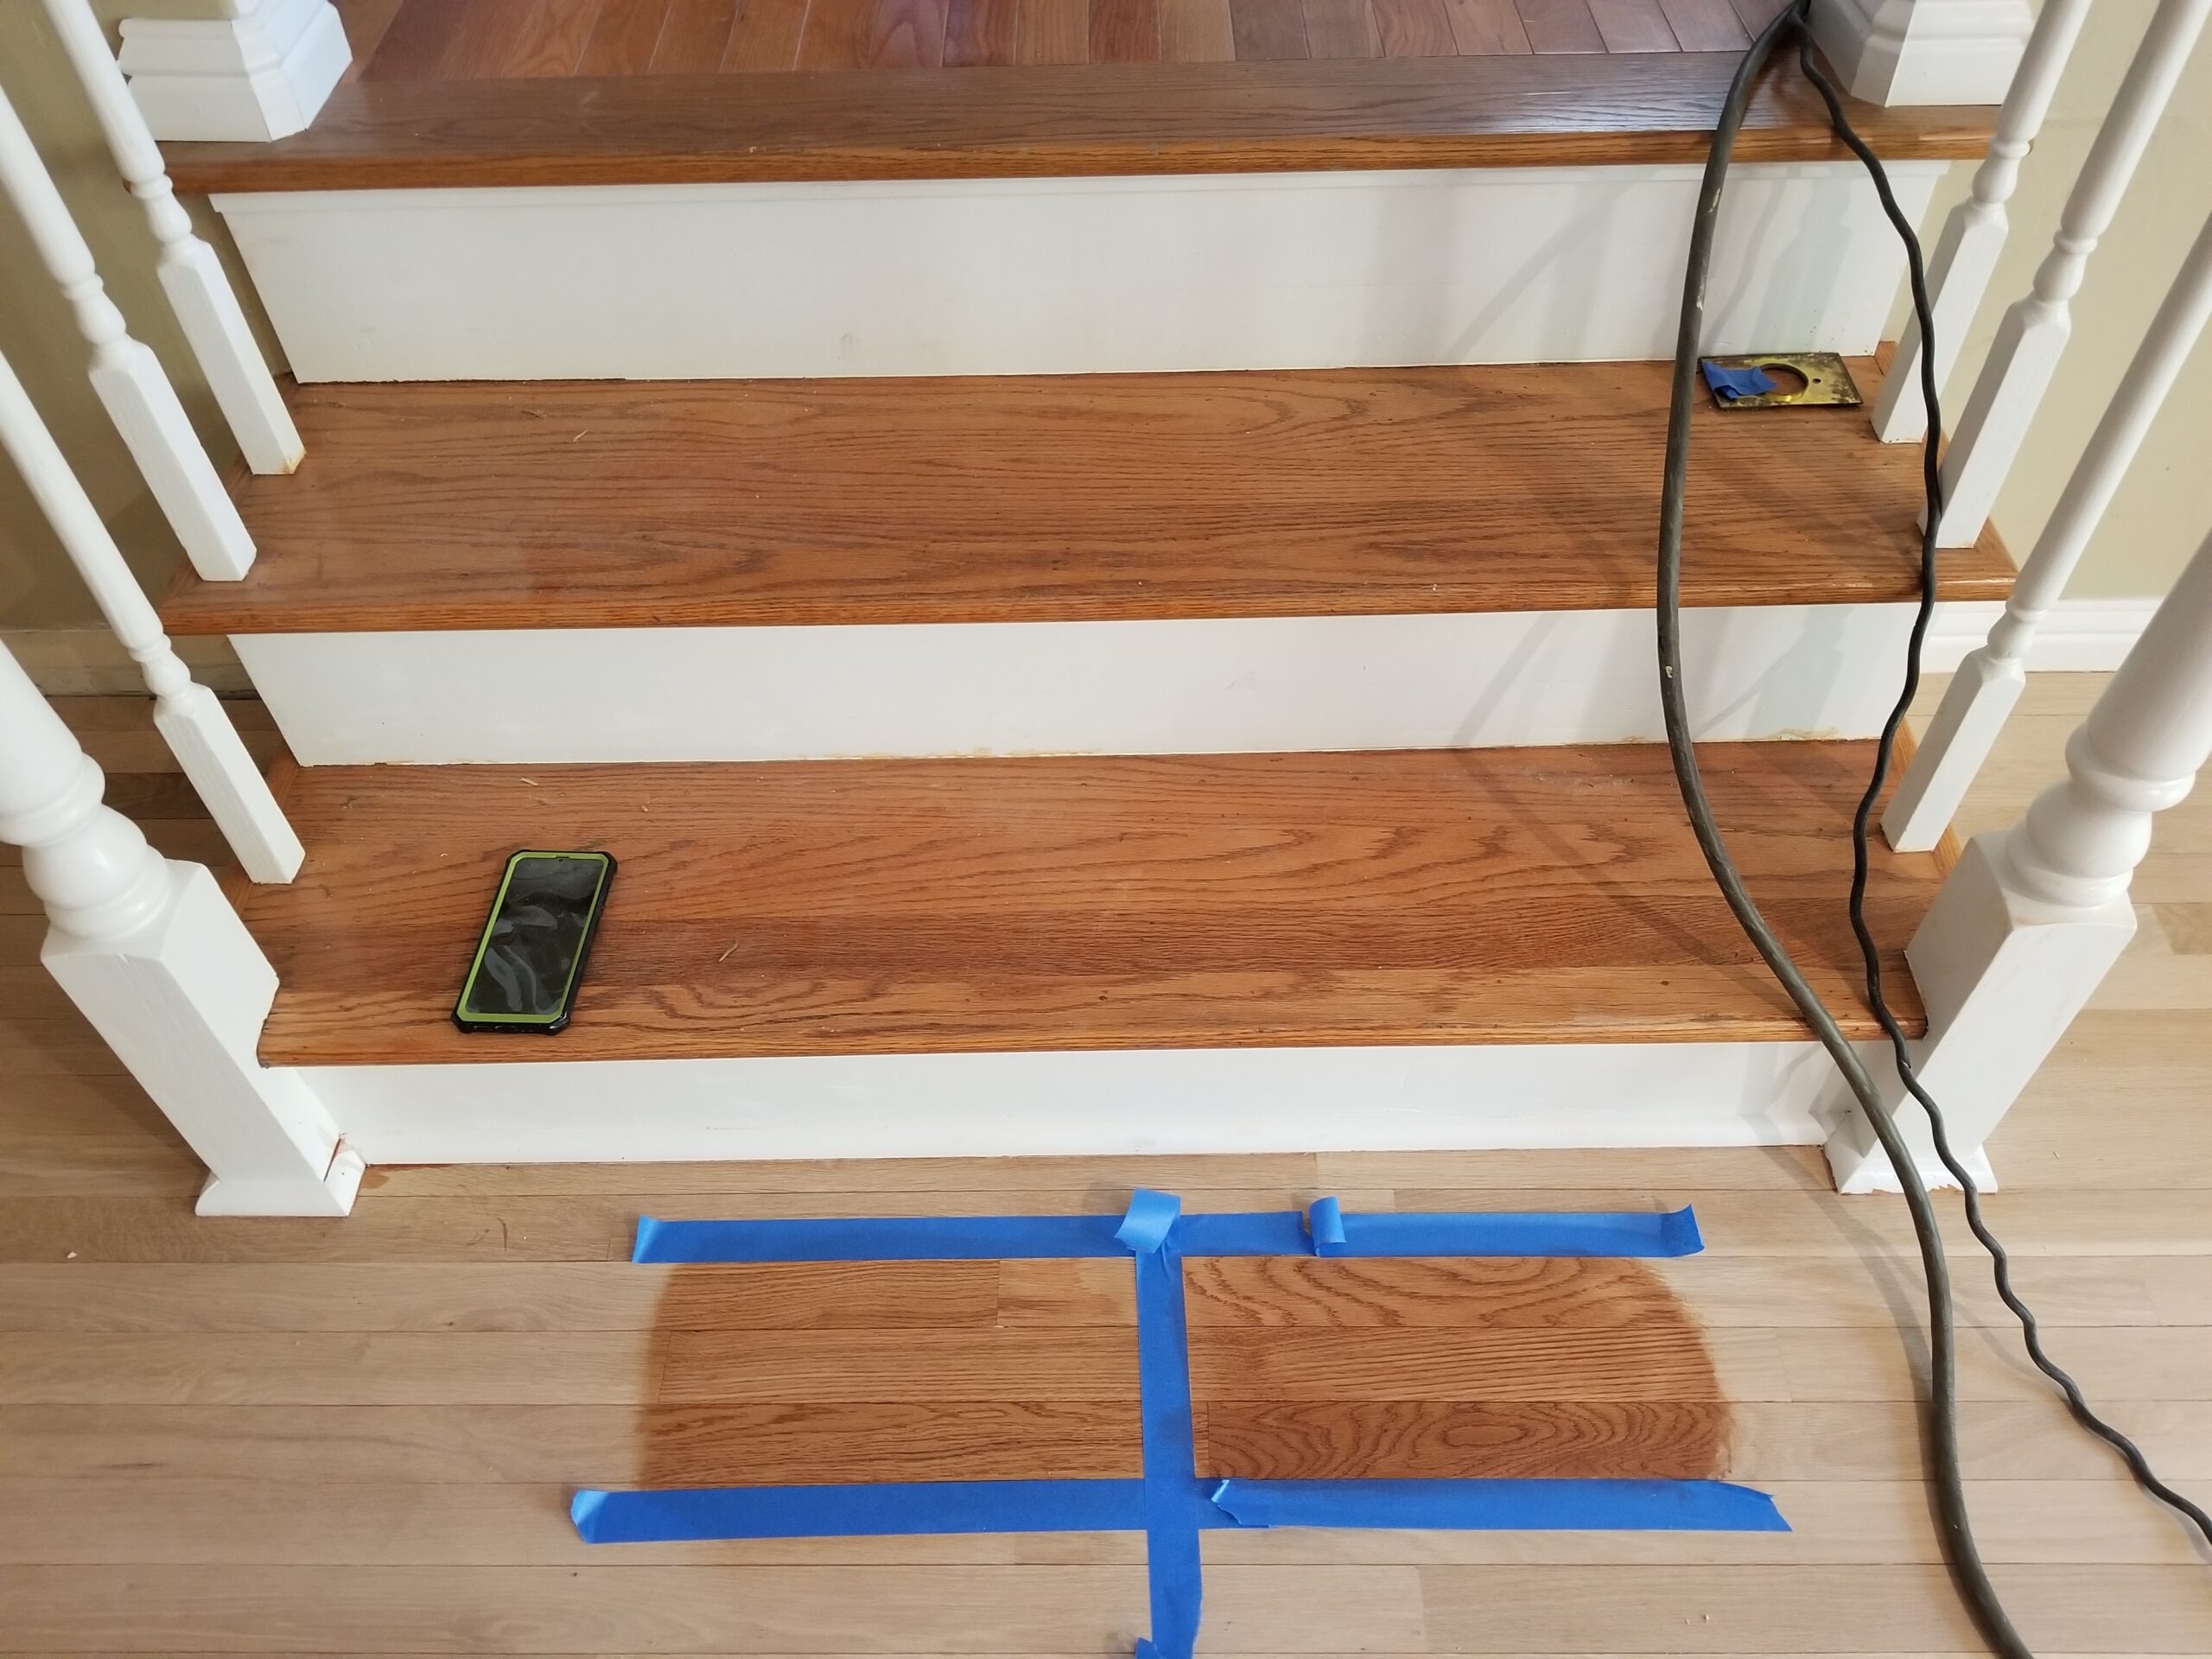 Stain-and-finish mockup for Palo Alto residential stairs.